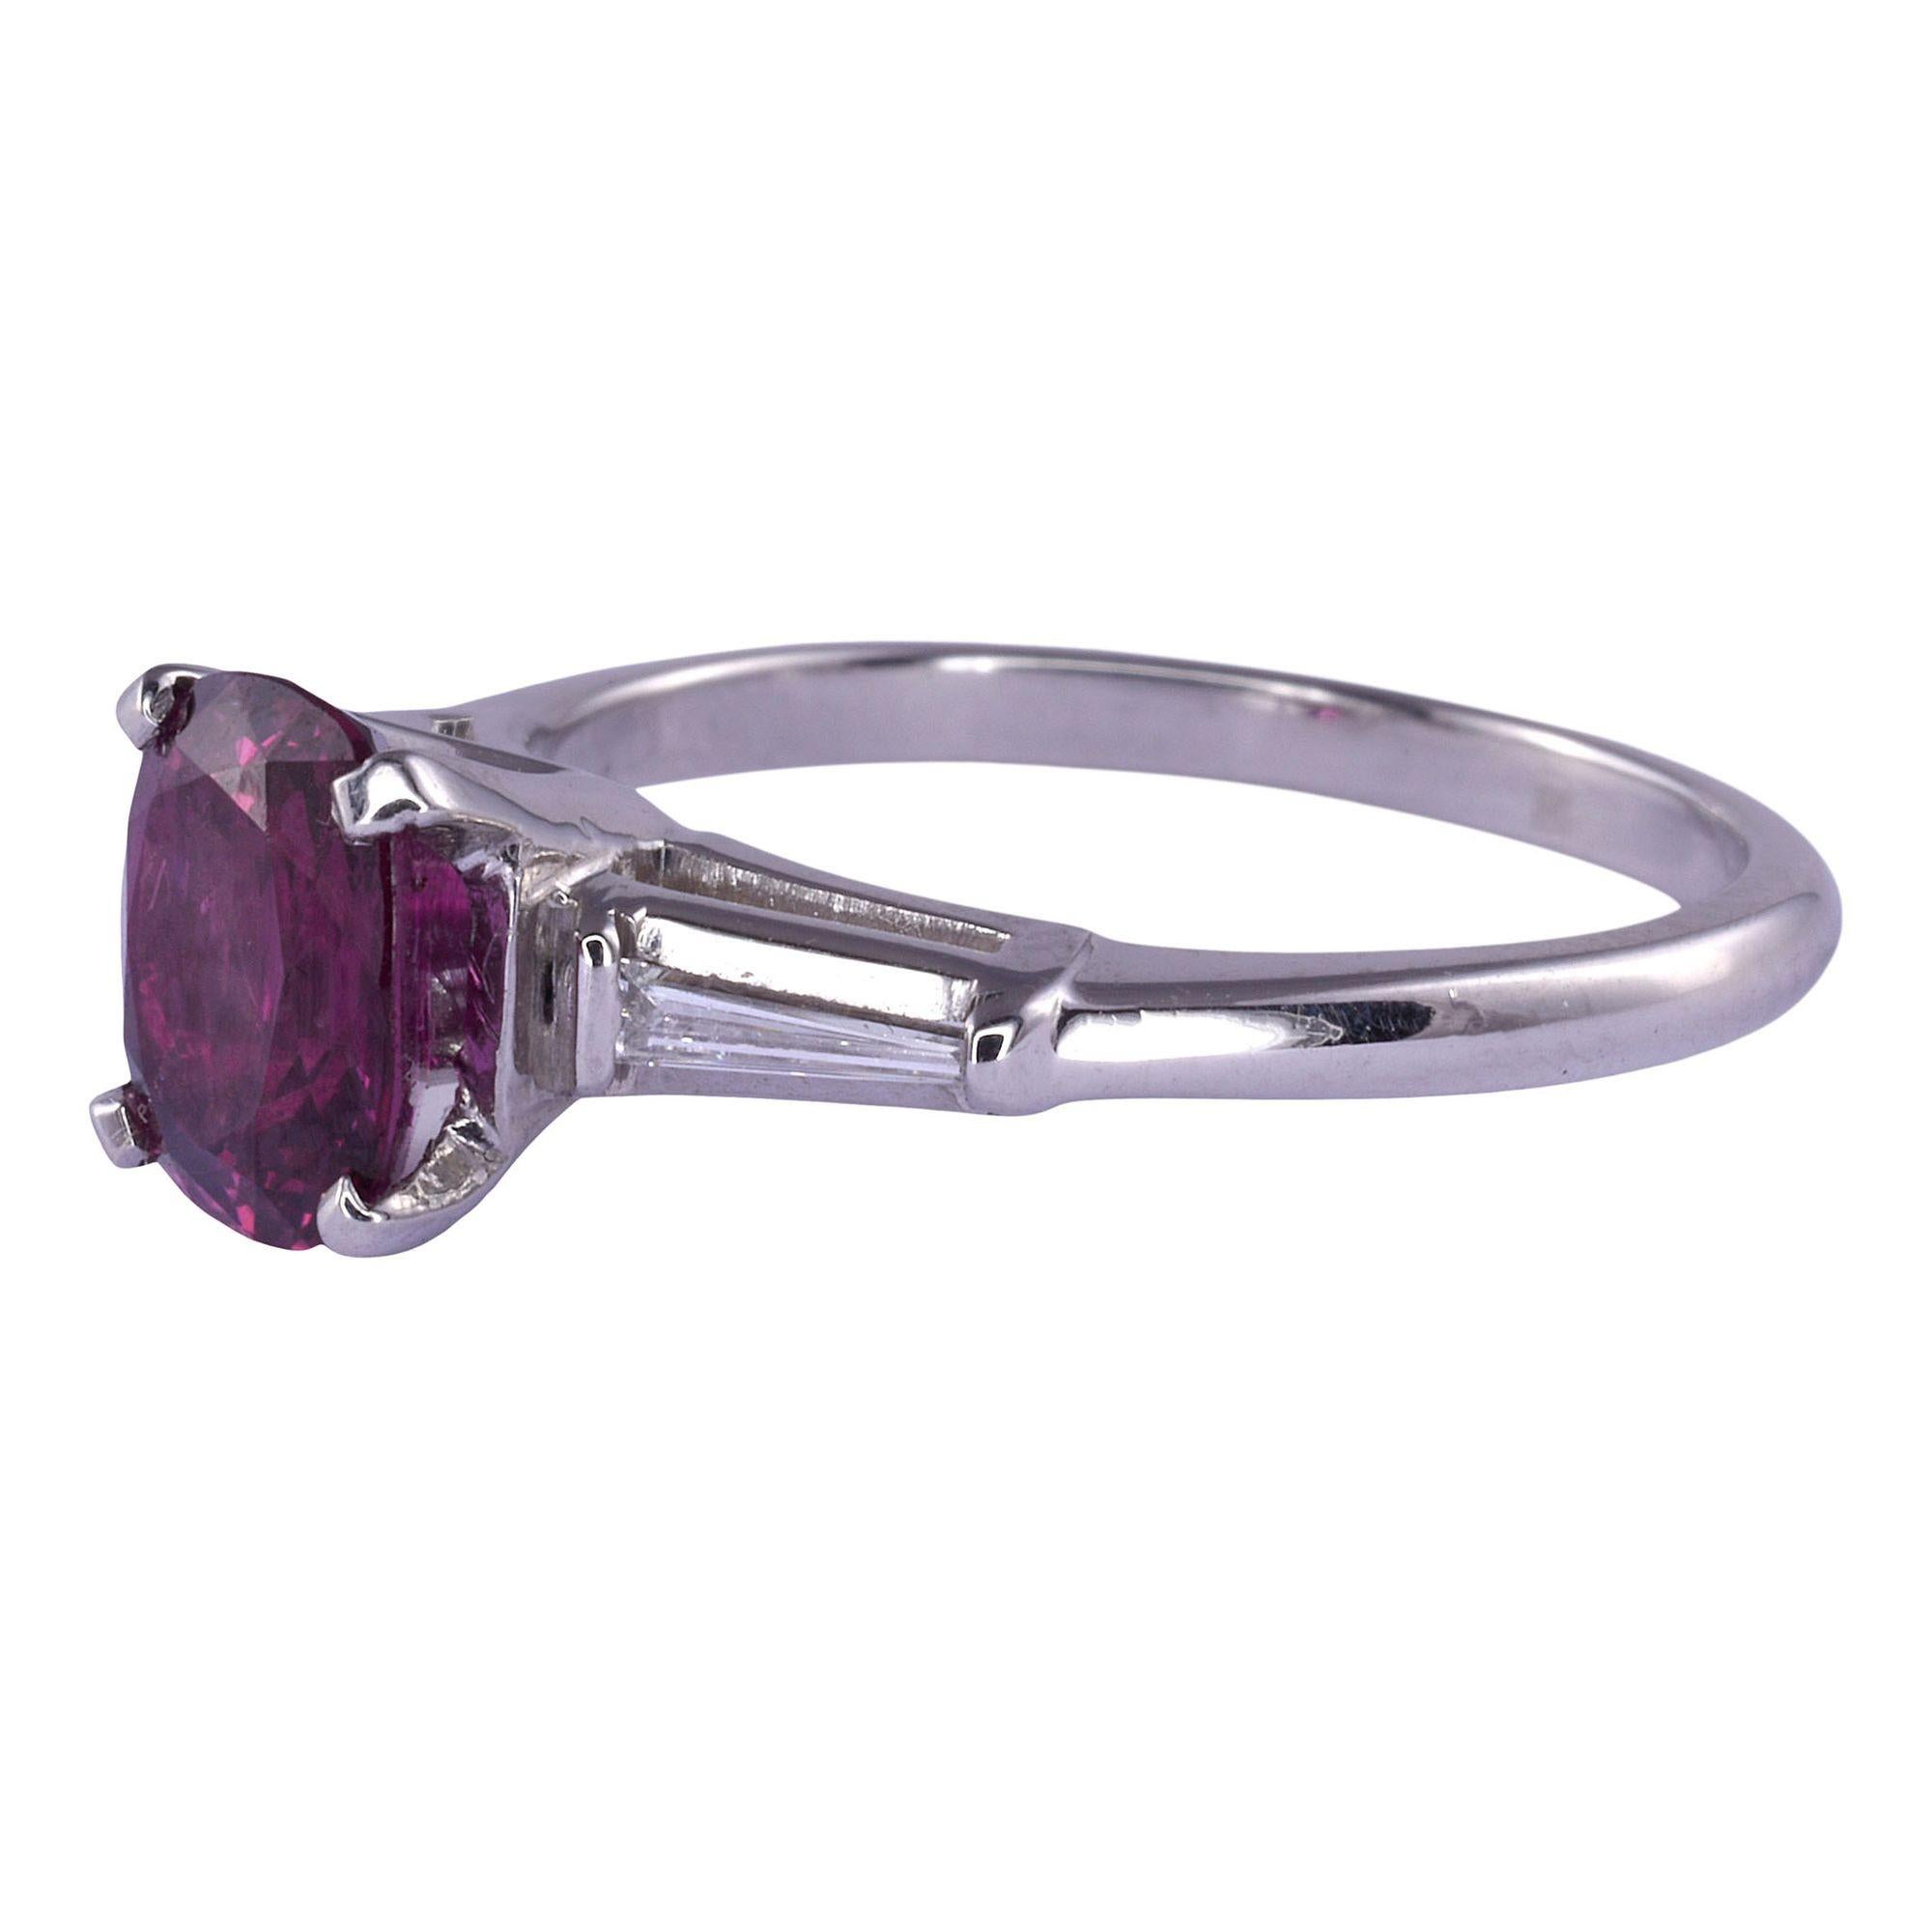 Estate 1.59 carat ruby platinum ring. This estate ring is crafted in platinum and features a 1.59 carat ruby center with two tapered baguette diamond accents. The diamonds have .12 carat total weight with VS clarity and F-G color. This ruby ring is